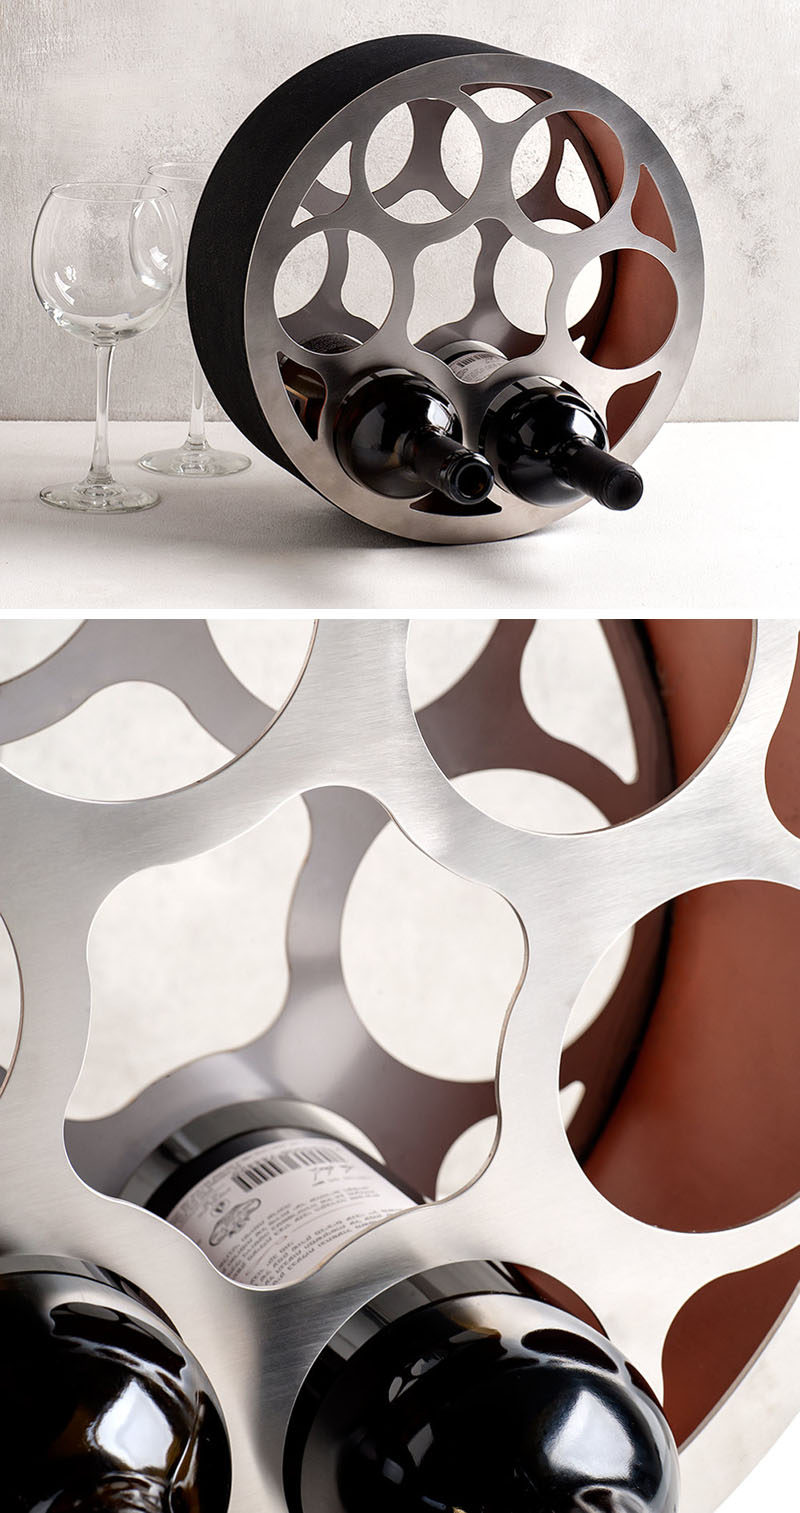 13 Wine Bottle Storage Ideas For Your Stylish Home // A steel wine wheel like this one adds a unique design piece to your home and creates a stylish spot to store your bottles.